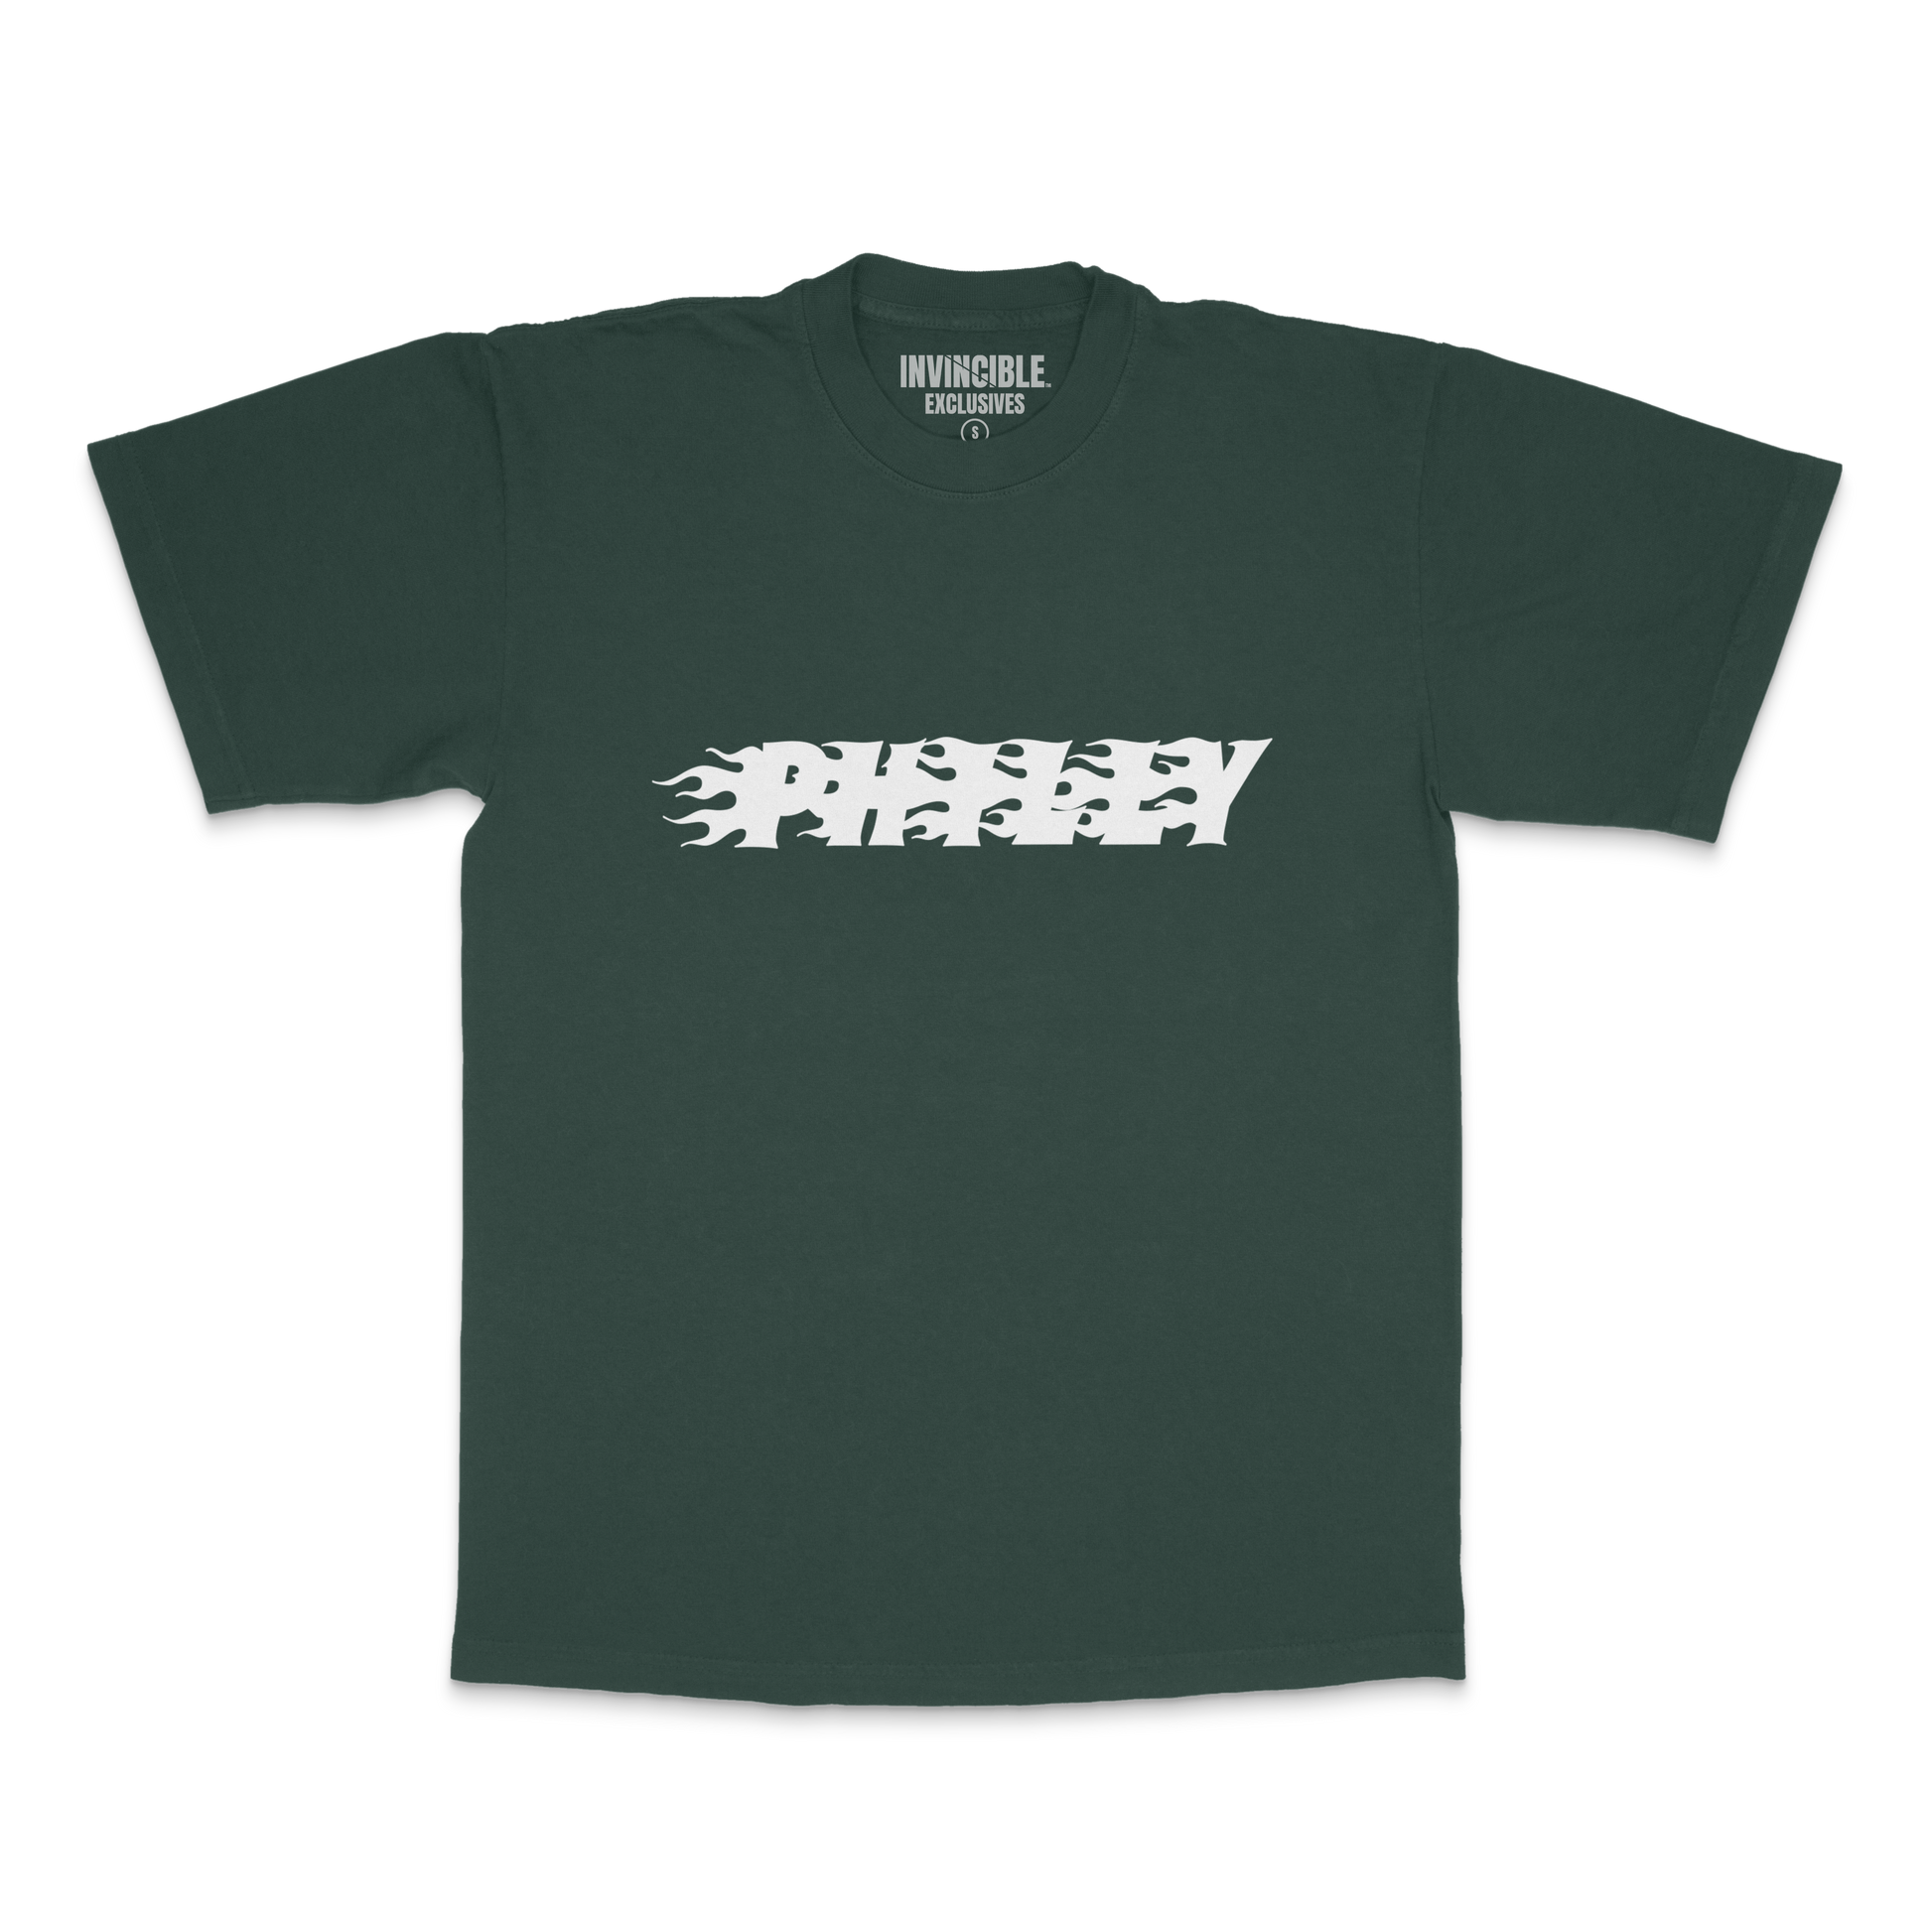 Invincible Exclusives Philly T-Shirt - Green